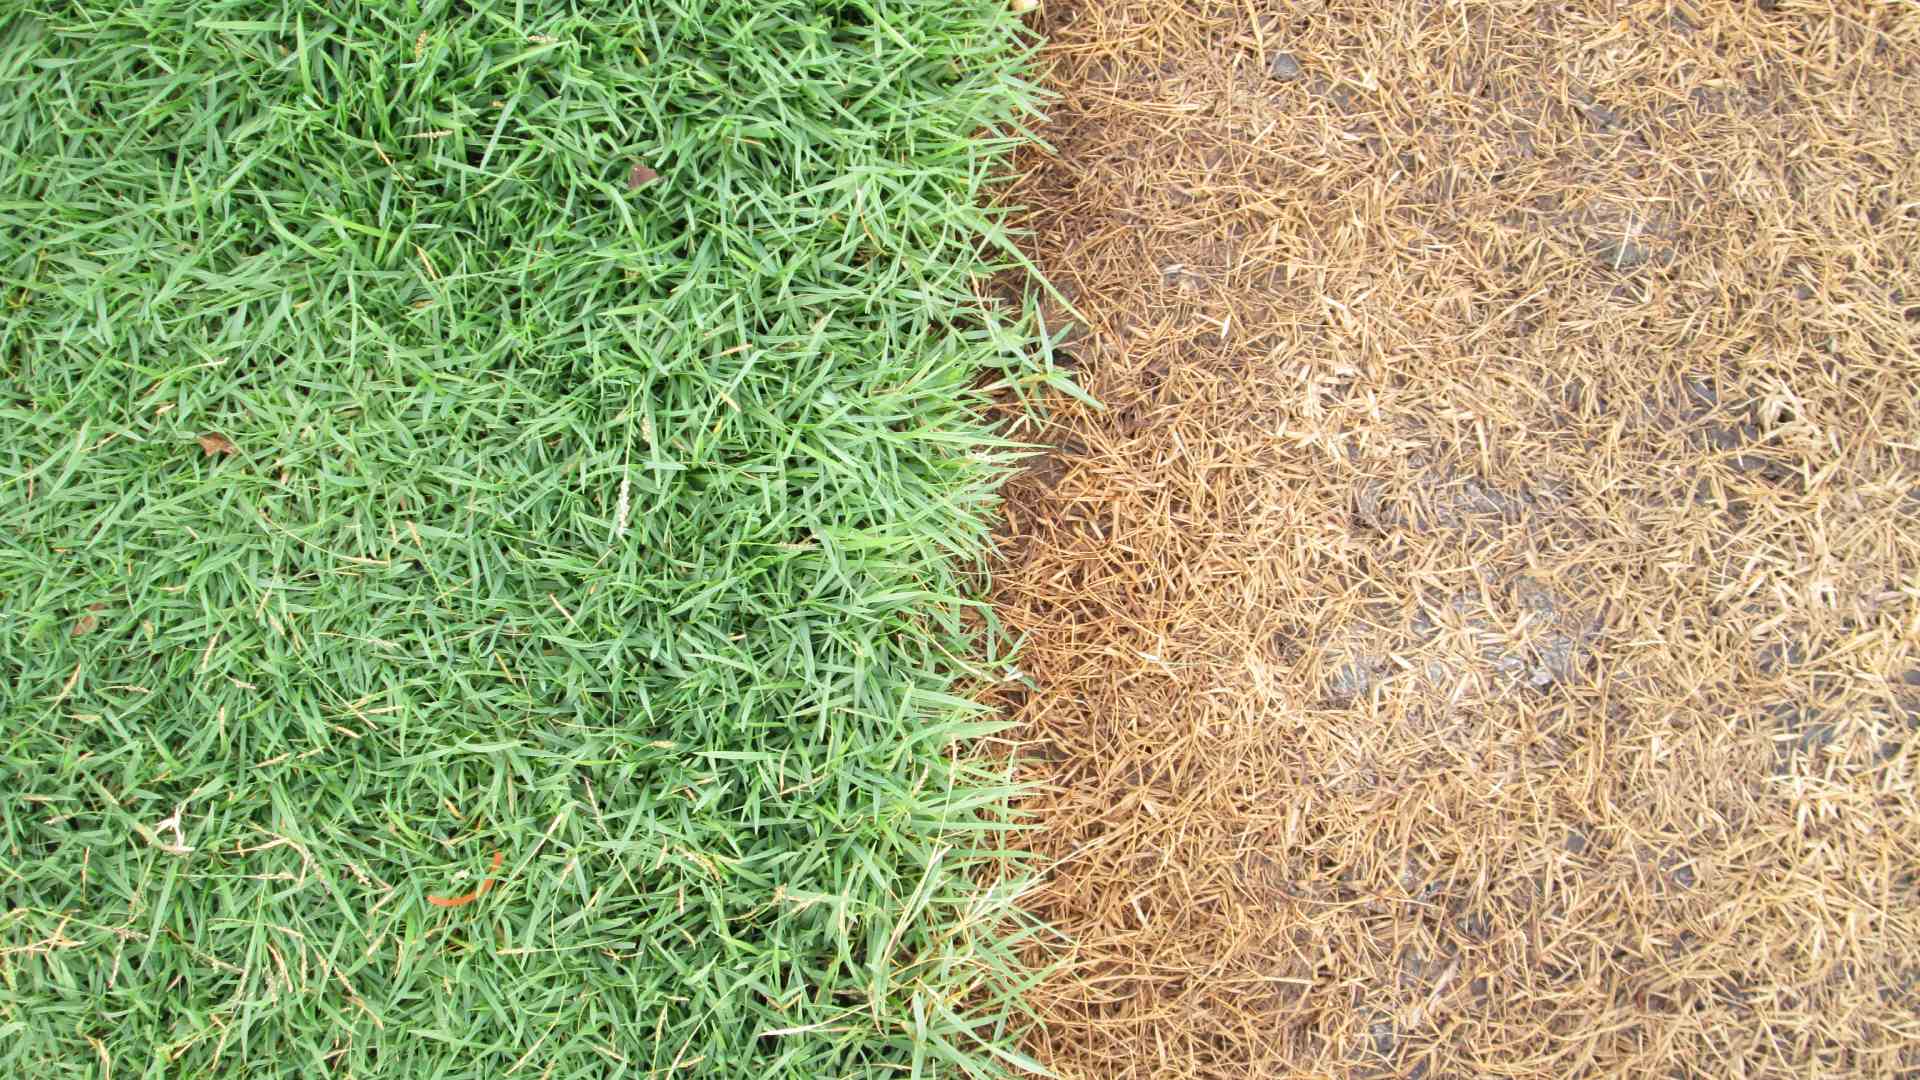 Fertilizer & Weed Control - Why You Need Both in Tennessee